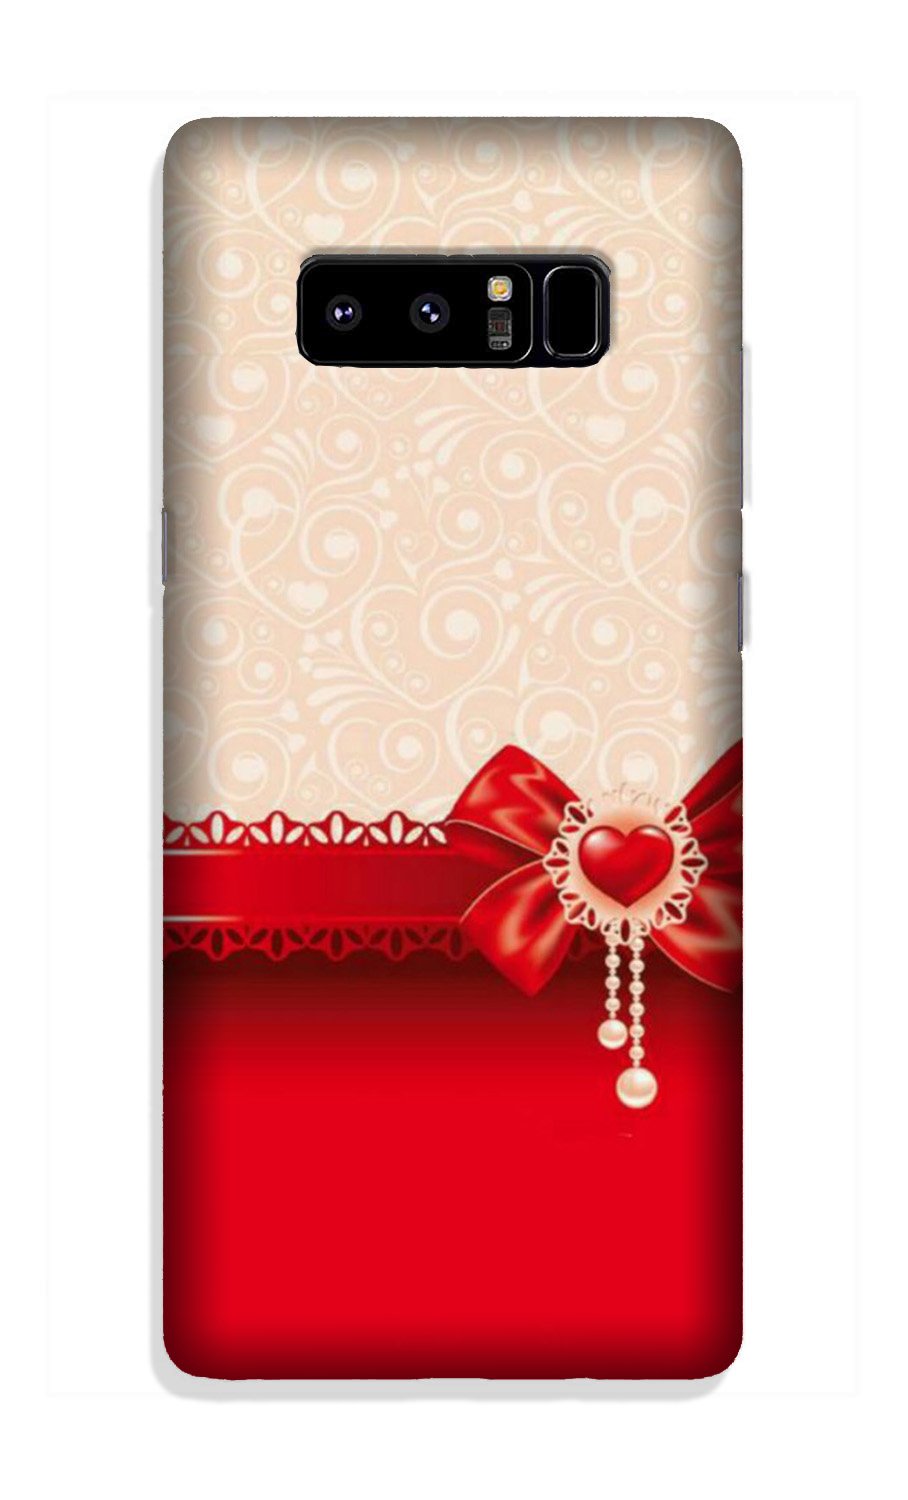 Gift Wrap3 Case for Galaxy Note 8